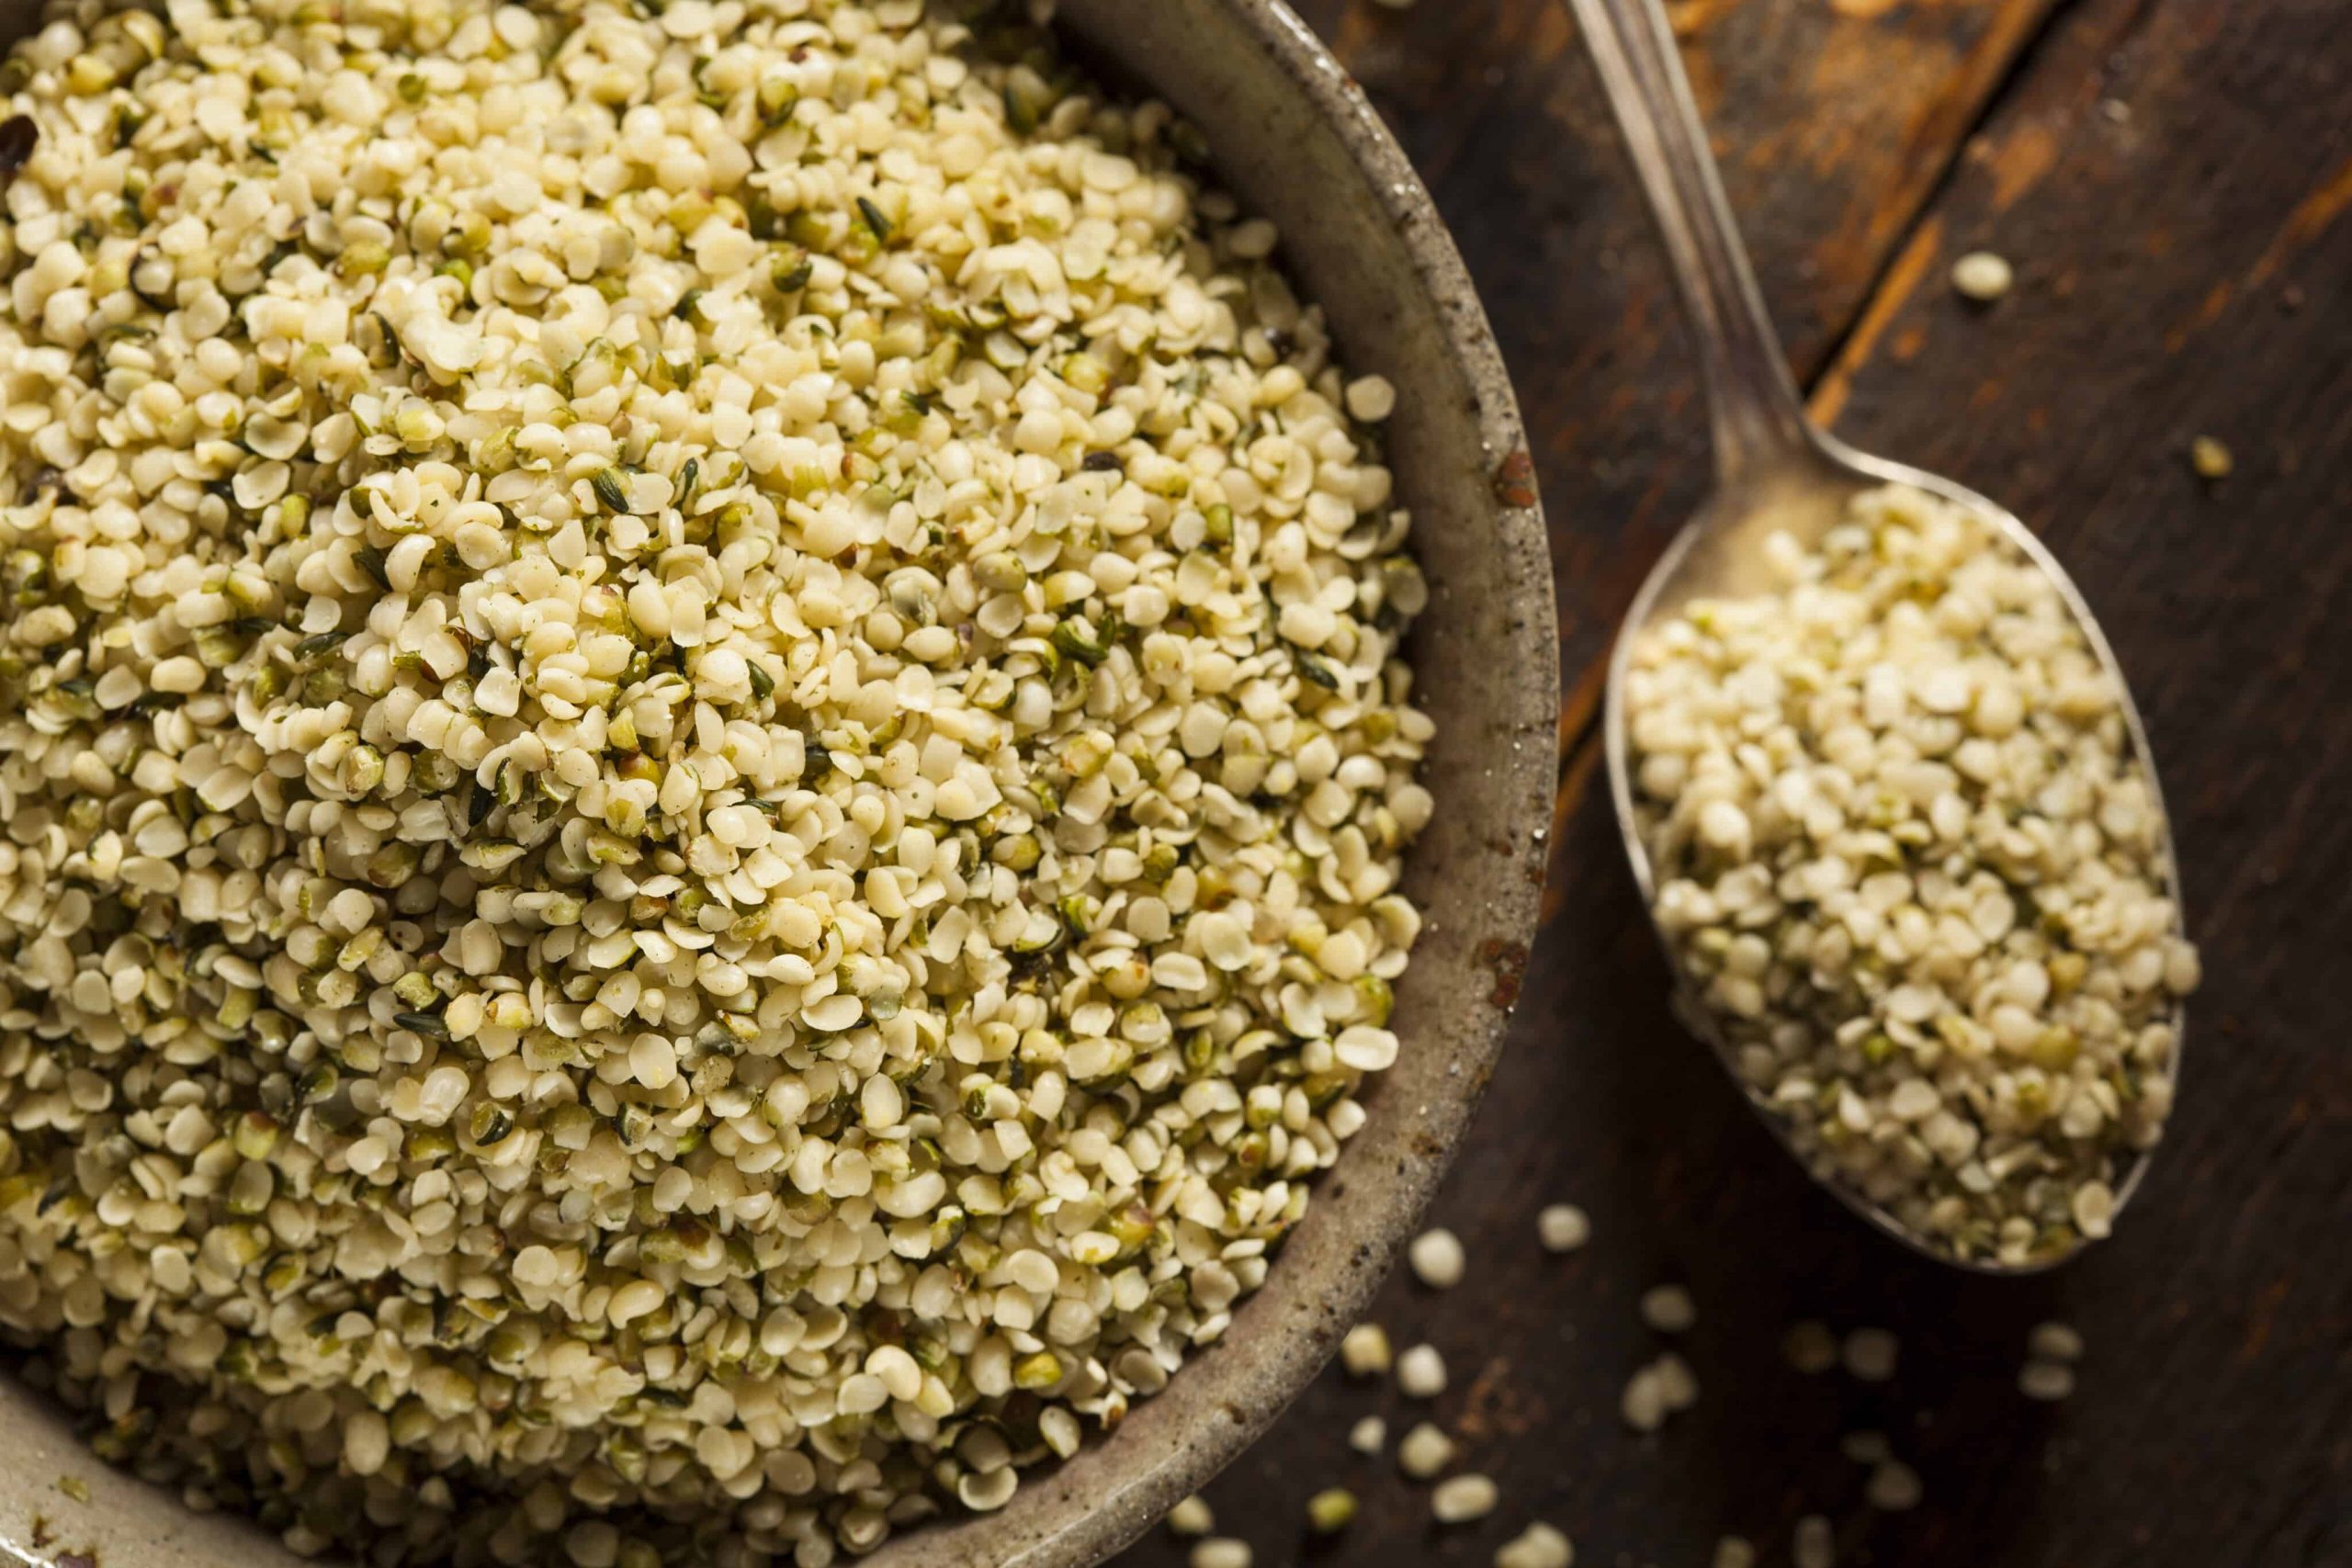 Data Finds Hemp Hulls Contain Bioactive Compounds Supporting Gut Health